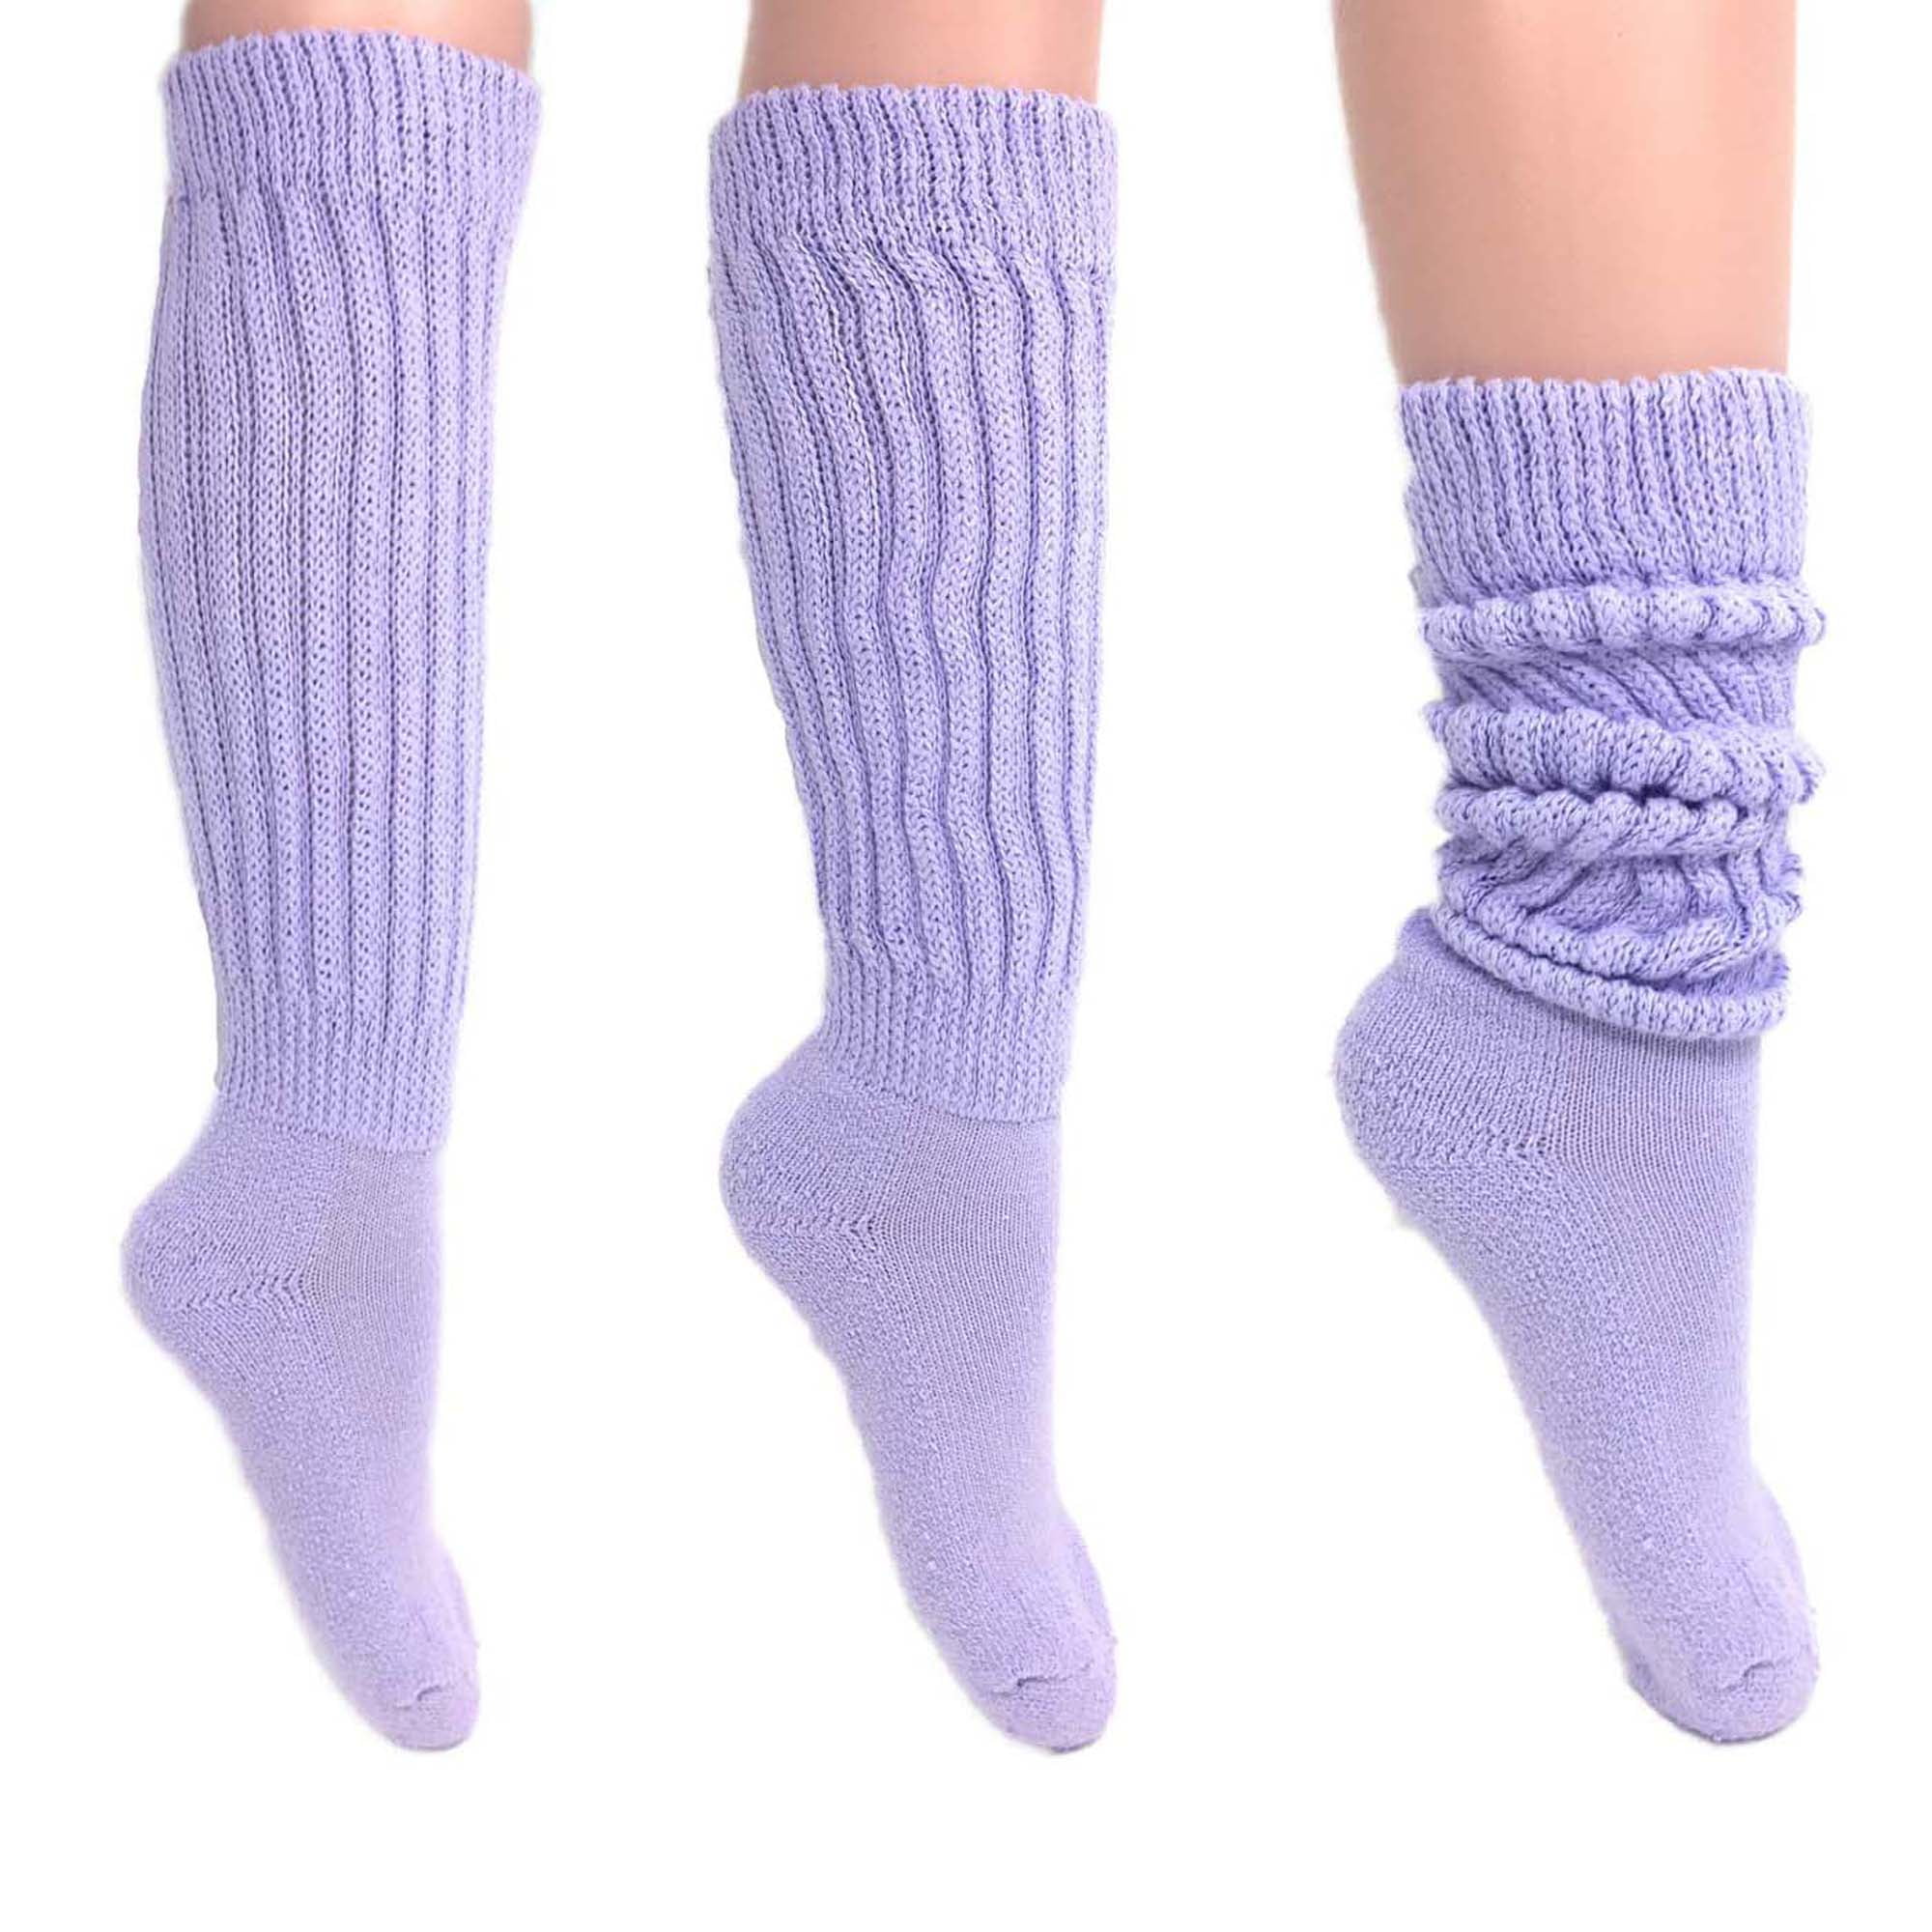 Womens Heavy Slouch Socks Lilac Size 9 to 11 3 PAIRS, Wal-mart, Walmart.com...